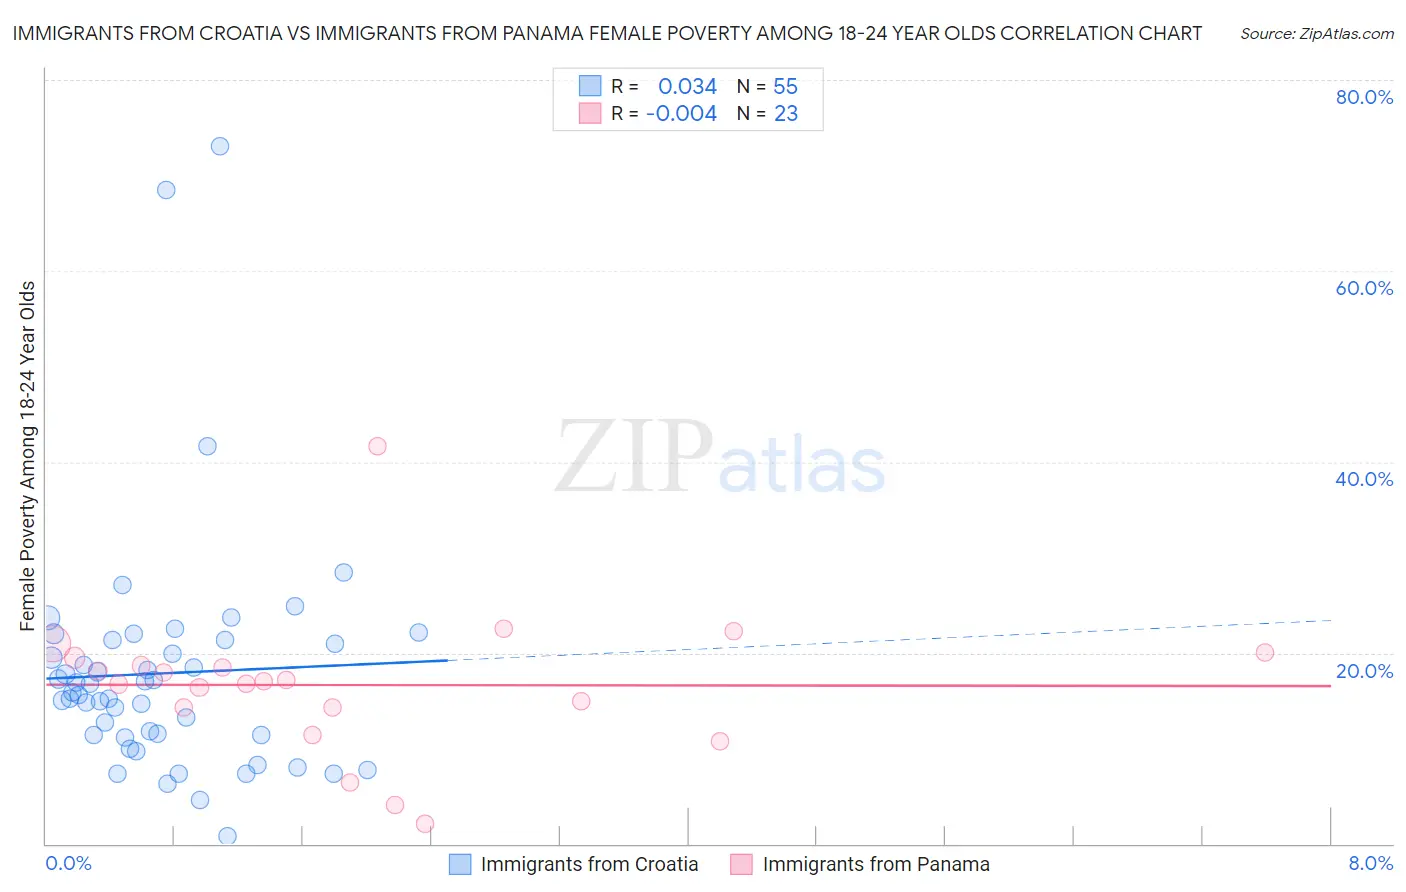 Immigrants from Croatia vs Immigrants from Panama Female Poverty Among 18-24 Year Olds